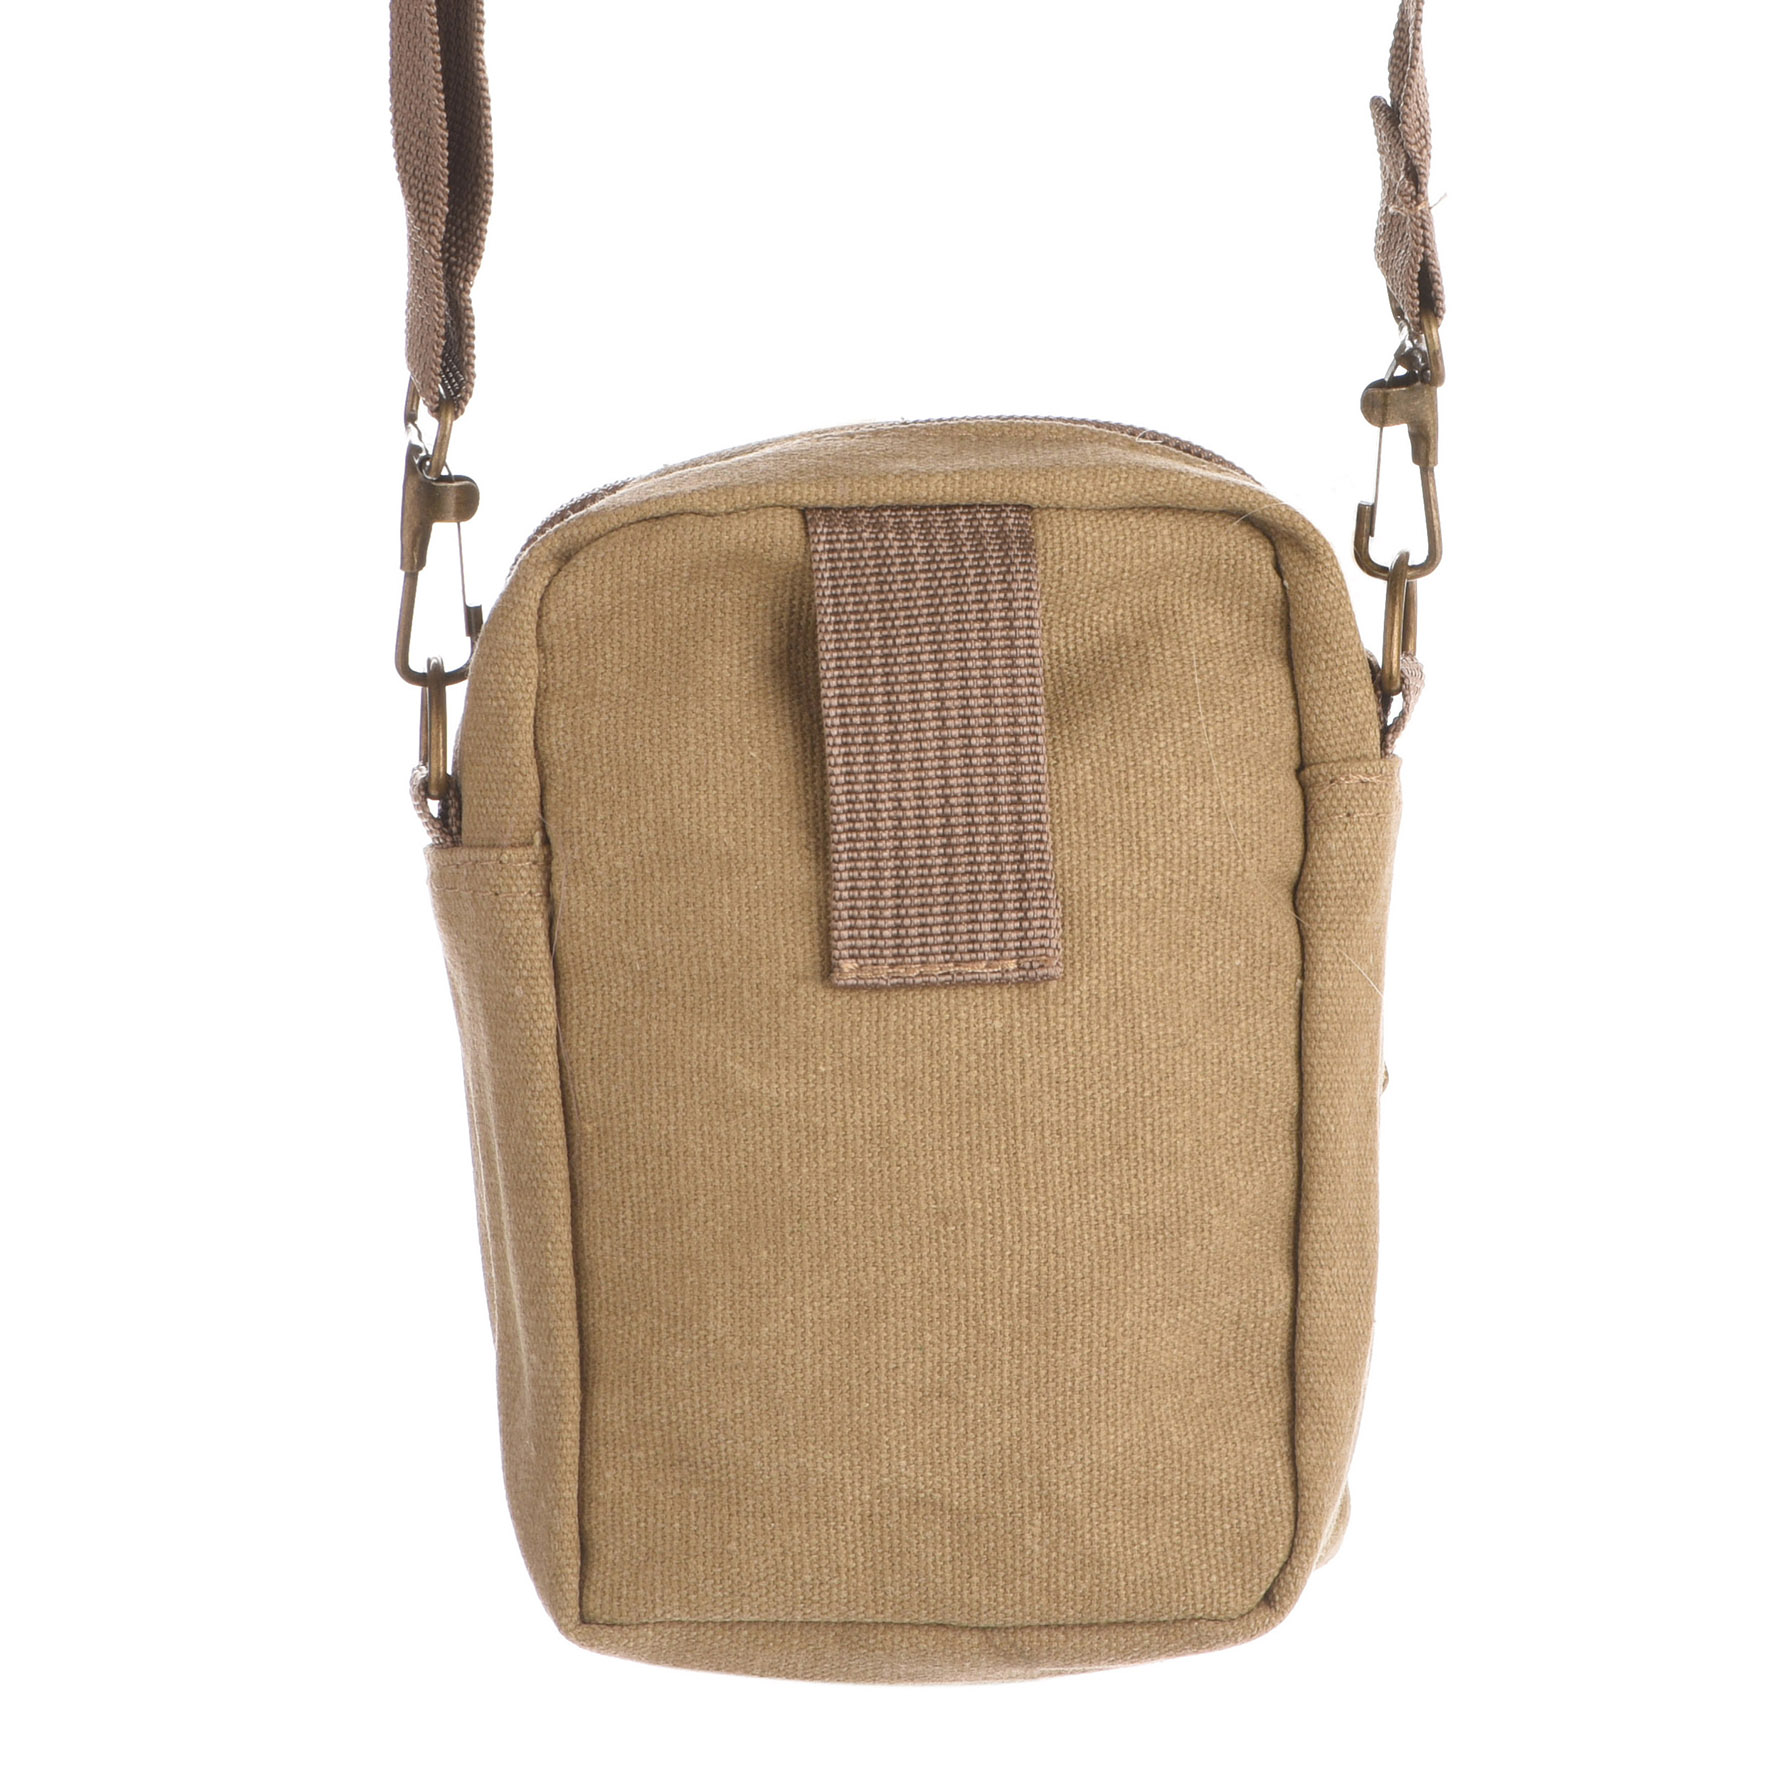 Unisex Small Canvas Bag with Detachable Shoulder Strap and Belt Loop | eBay